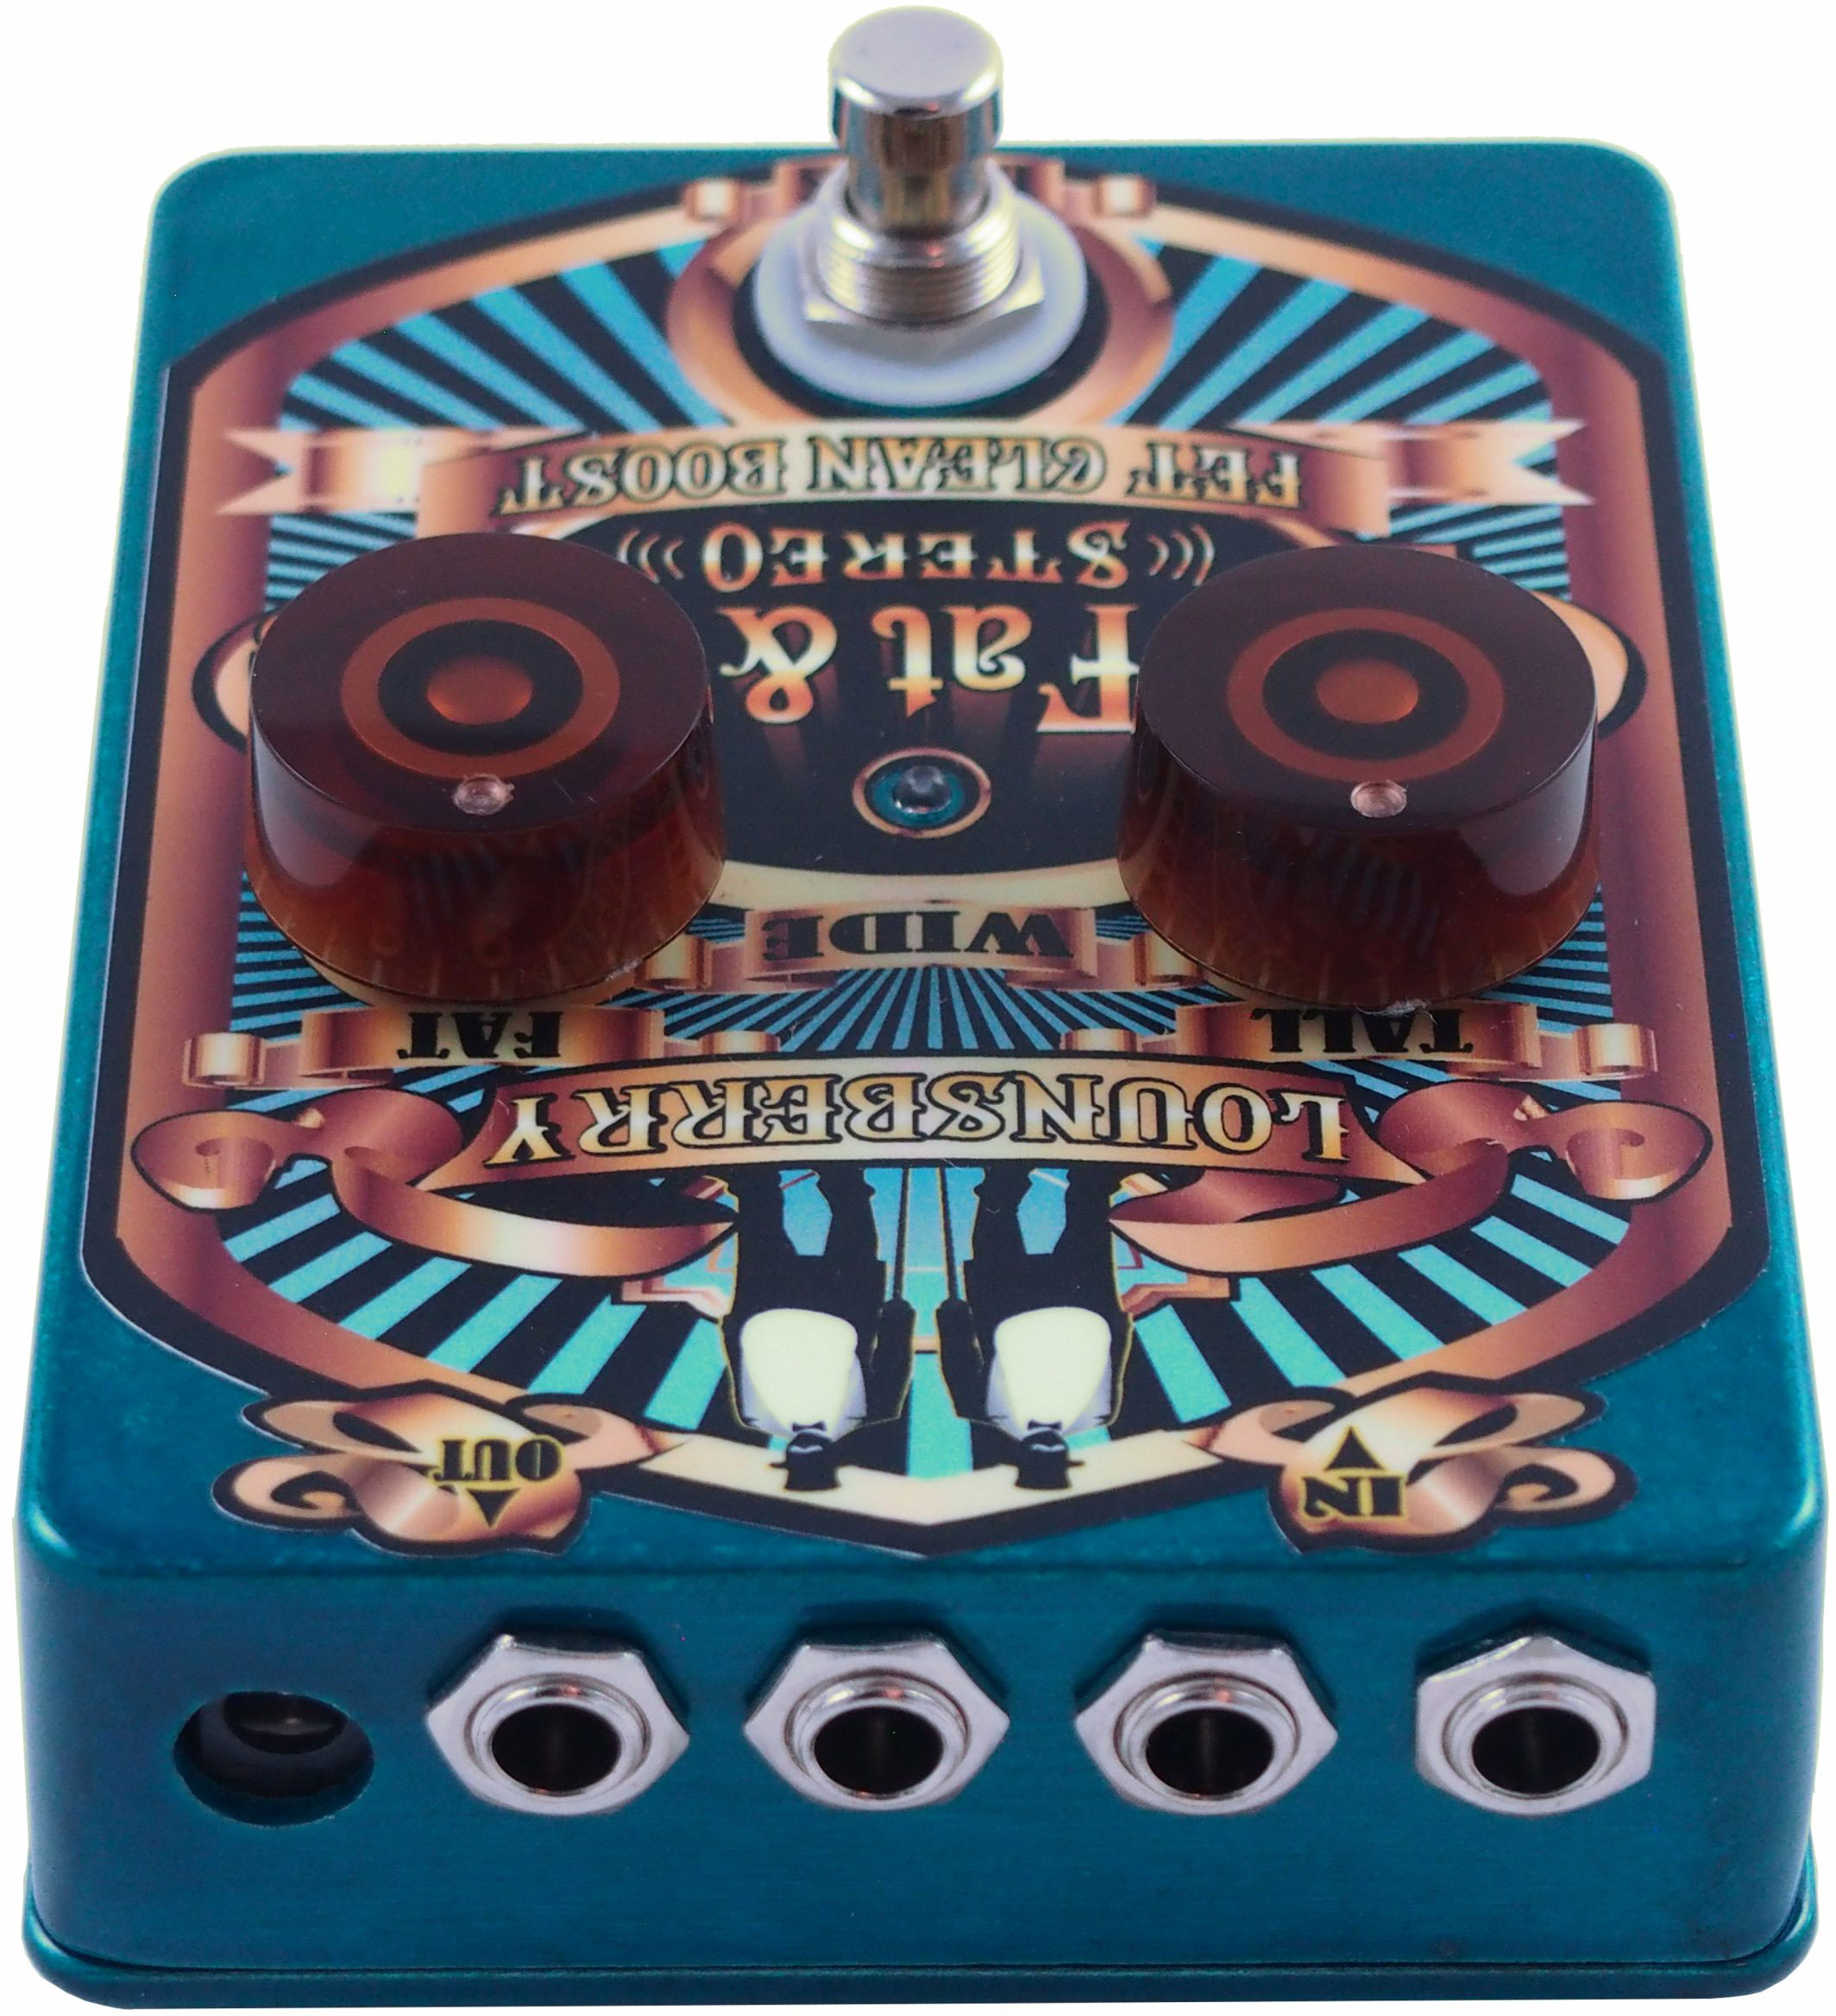 Lounsberry Pedals Tfw-1 Tall & Fat Wide Clean Boost Keyboard Standard - Accessoires Divers Claviers & Synthes - Variation 2